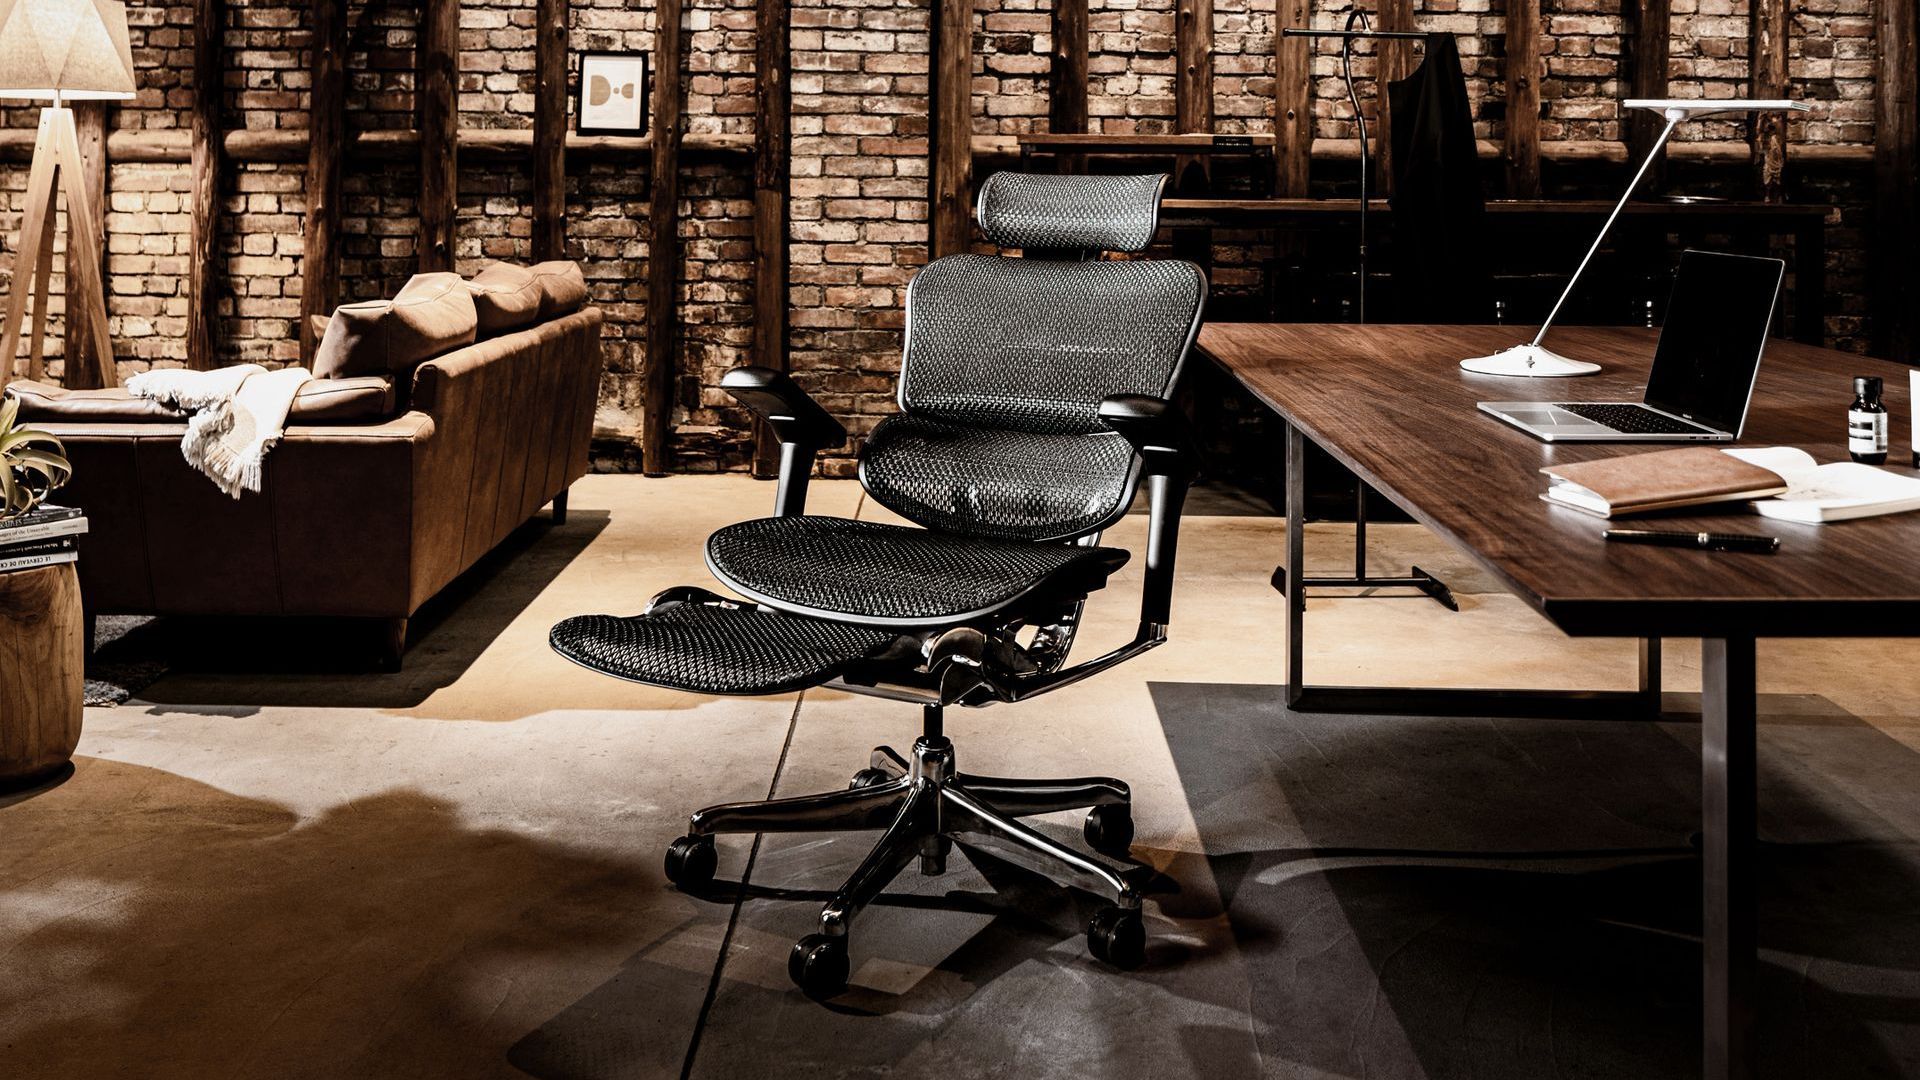 Black mesh ergonomic office chair in a relaxed lounge space with a desk and leather sofa.